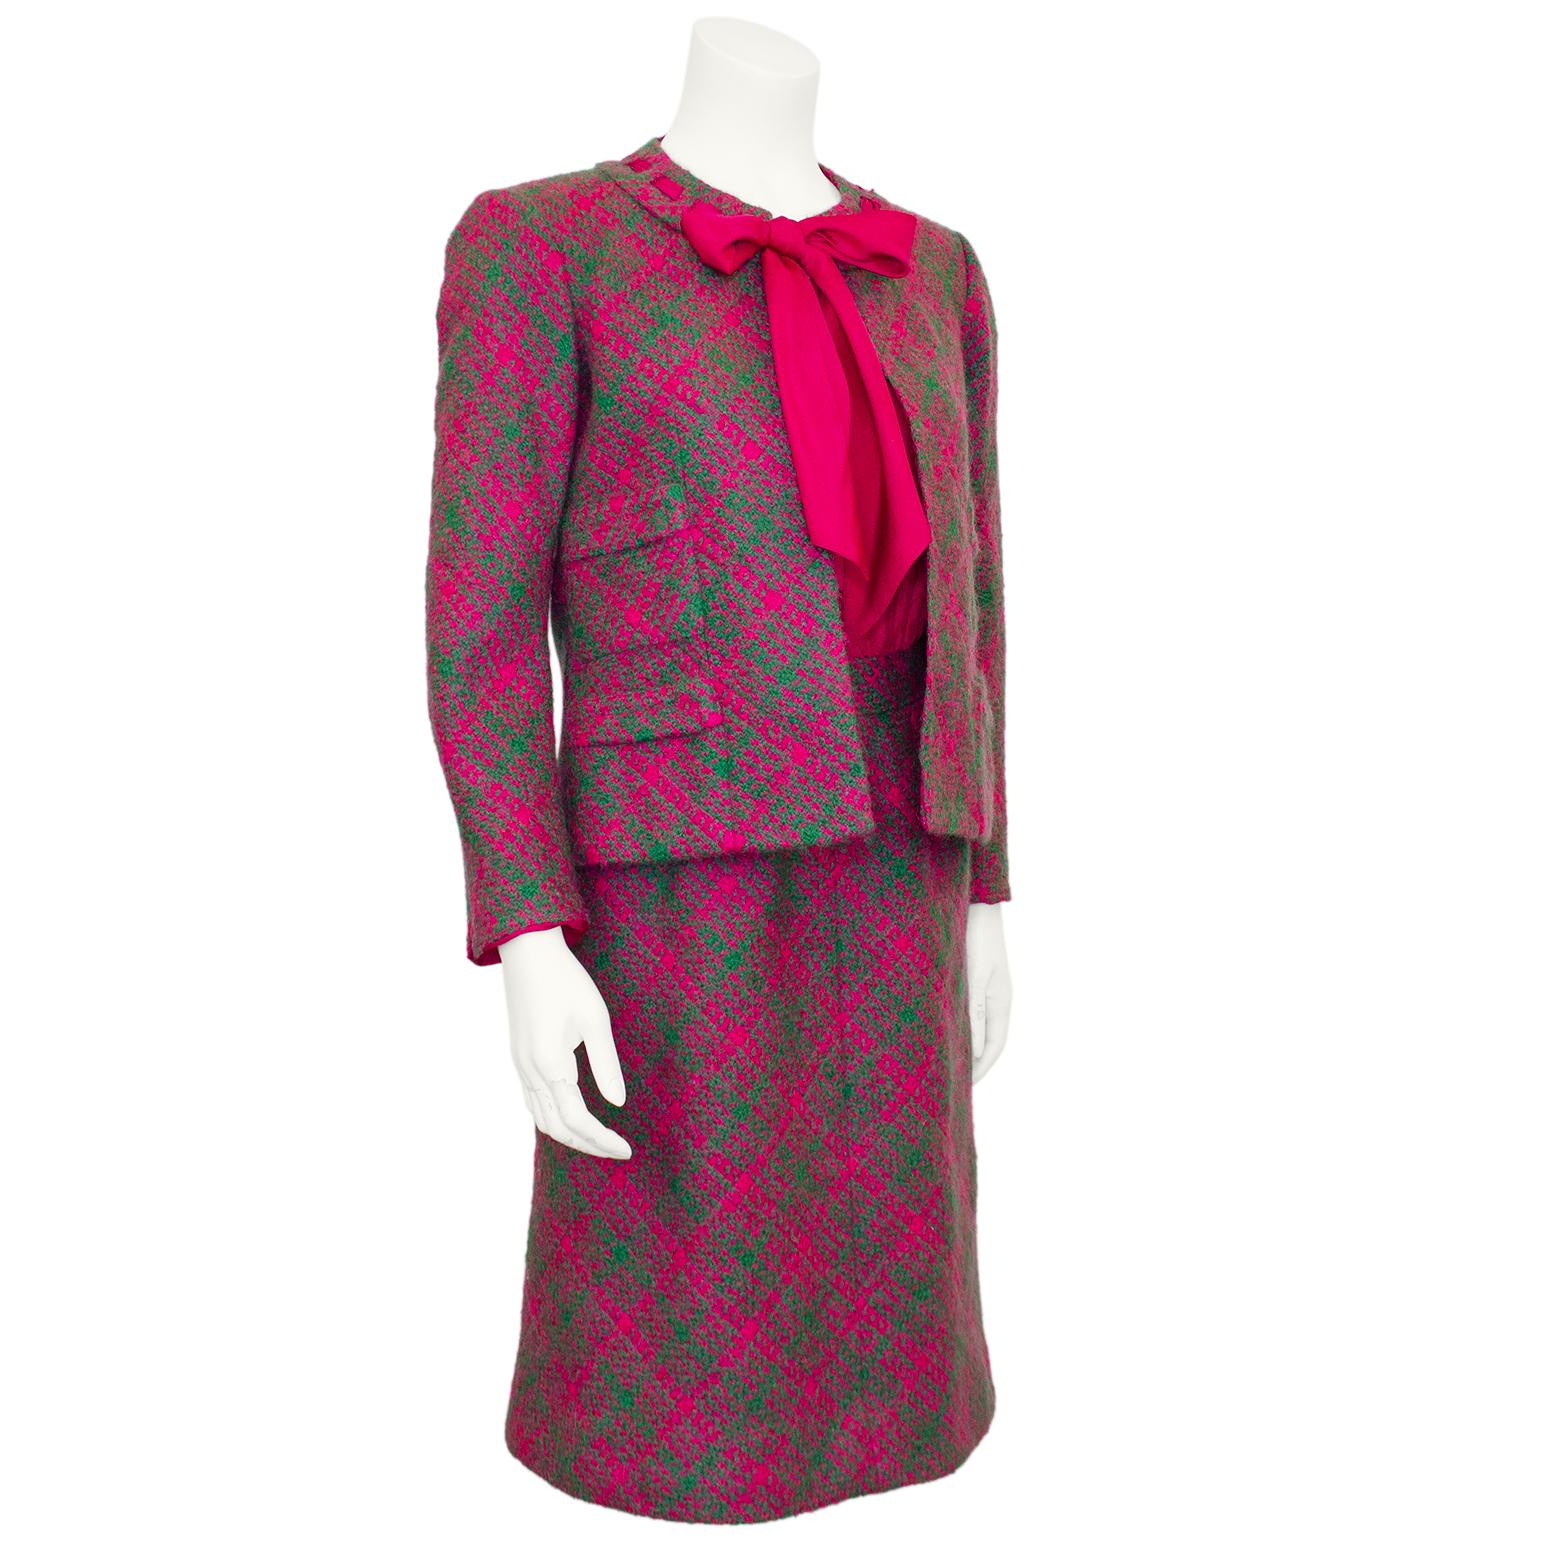 Absolutely stunning and vibrant magenta and green tweed Chanel Haute Couture dress and jacket ensemble from the 1960s. The collarless open jacket has a magenta silk scarf detail woven through and around the collar and can be tied in a bow or knot to